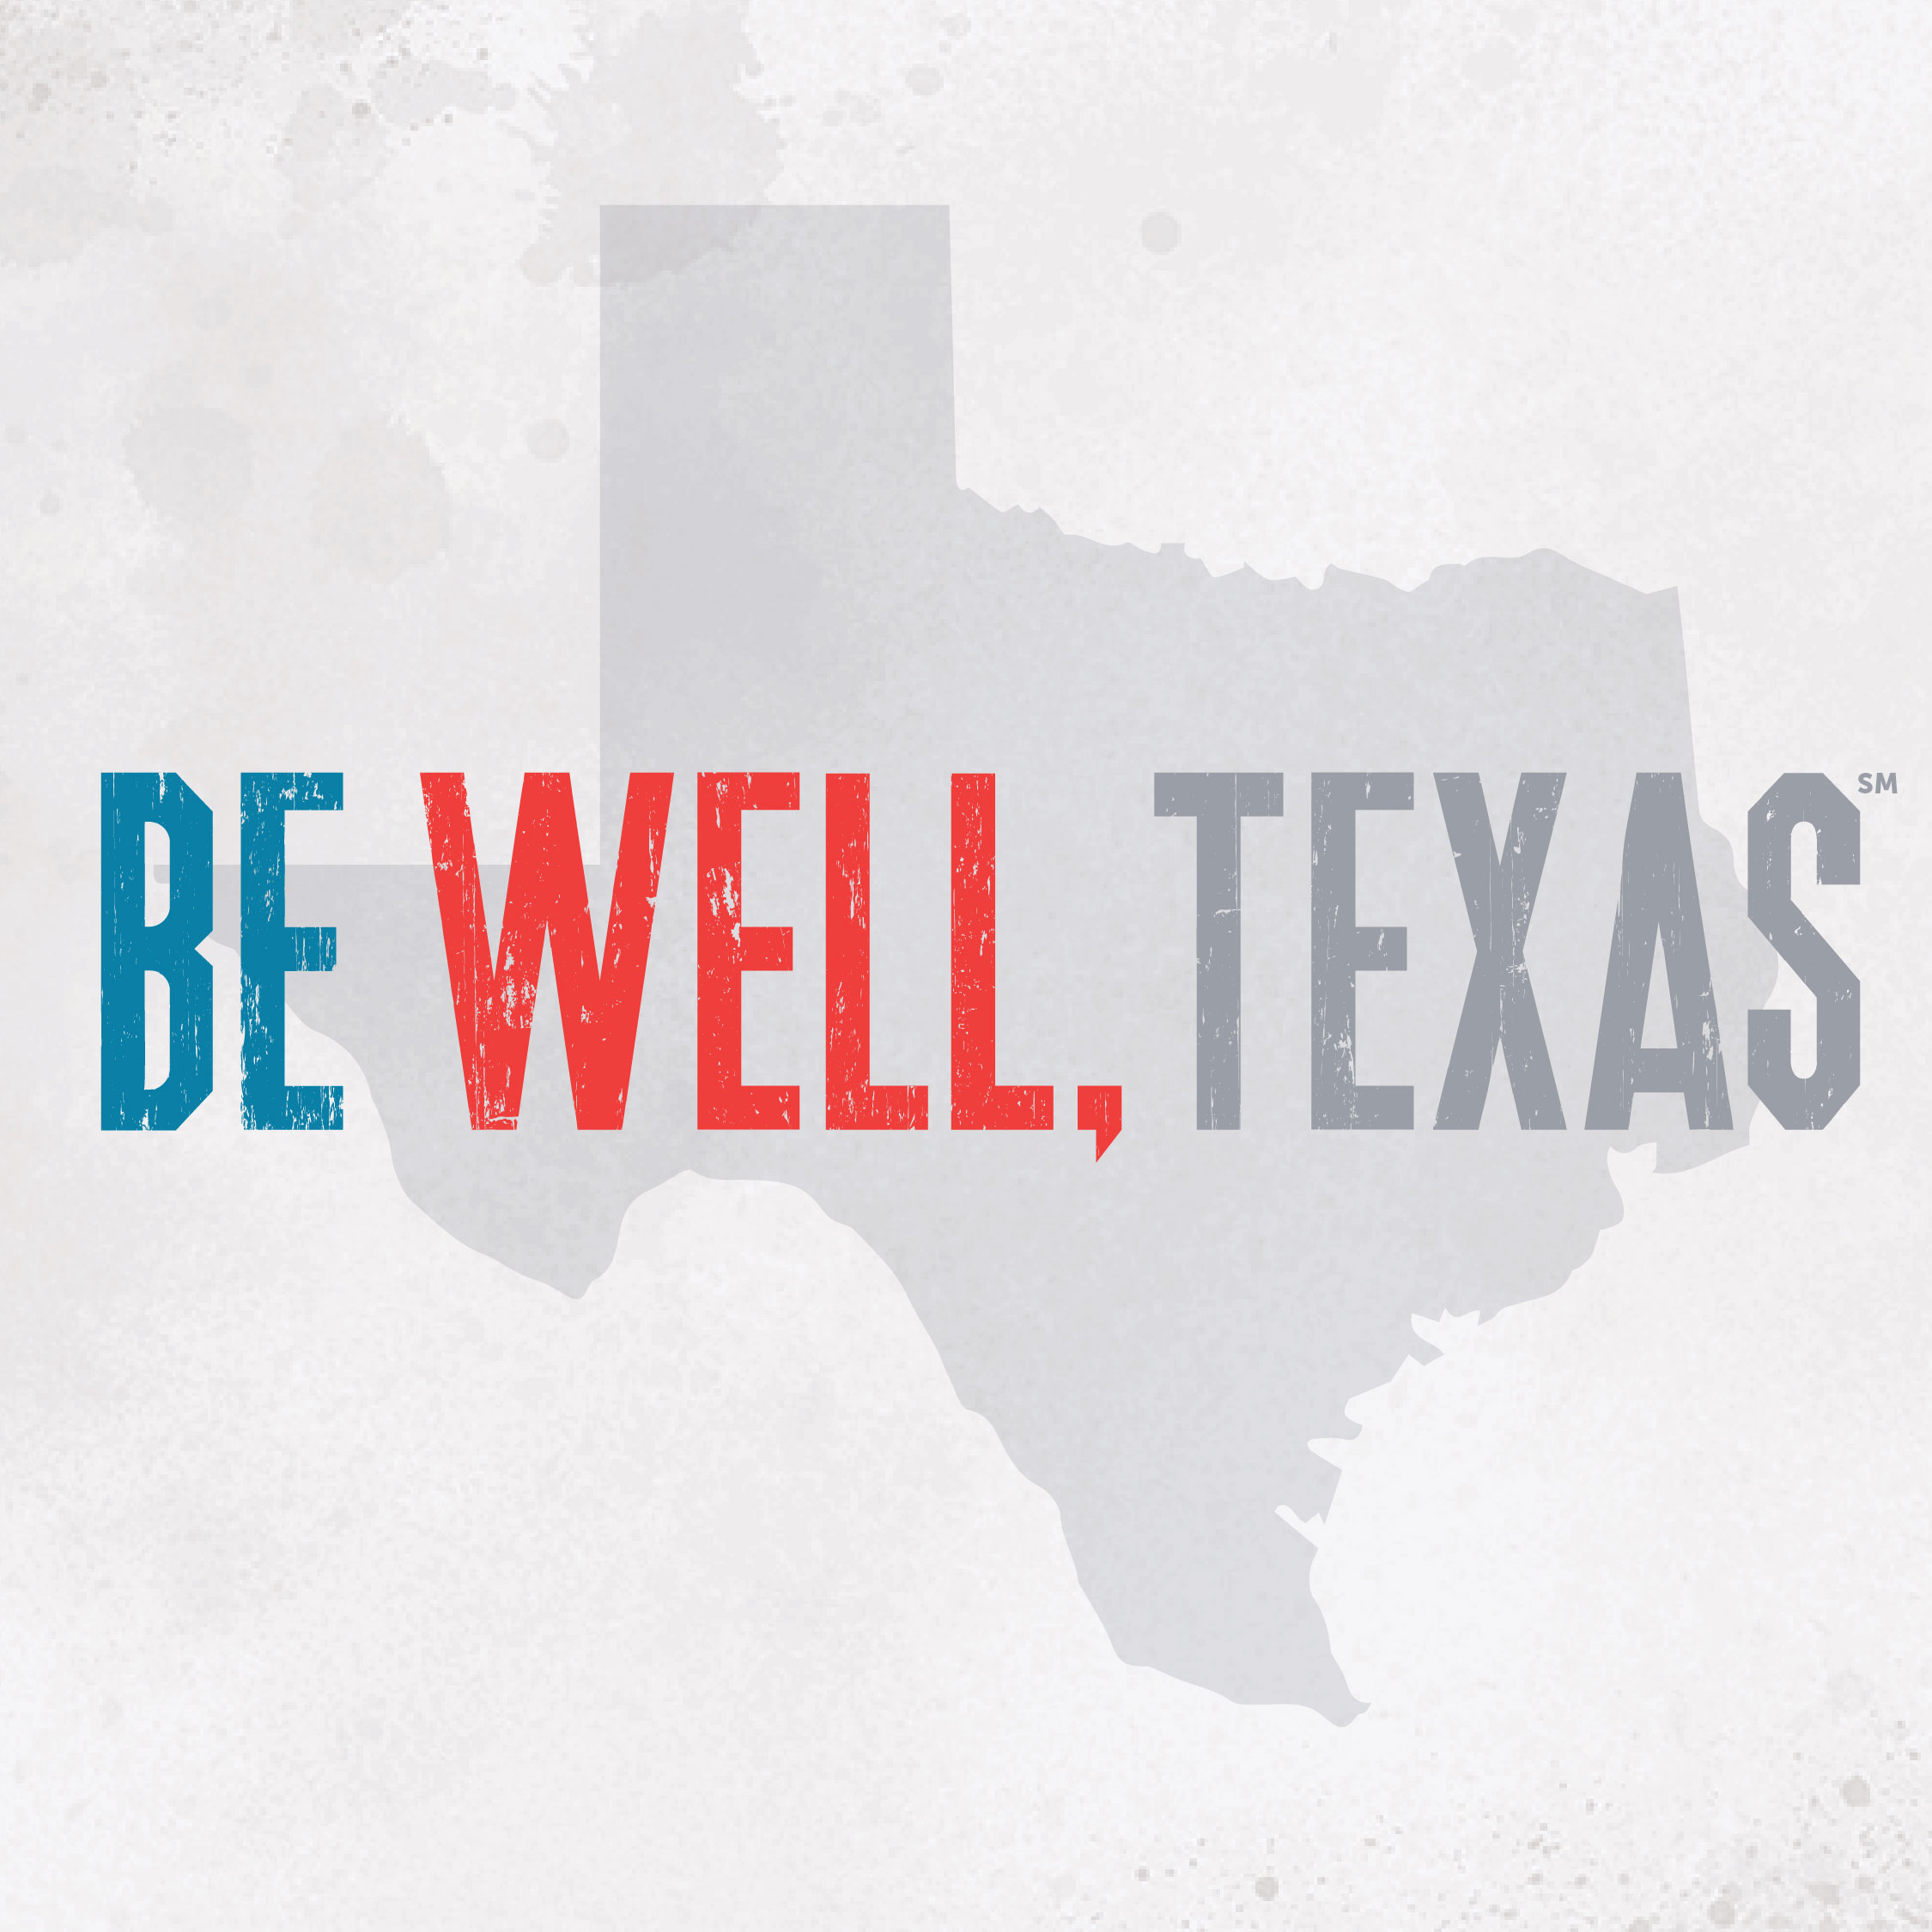 Be Well Texas logo with the state of Texas